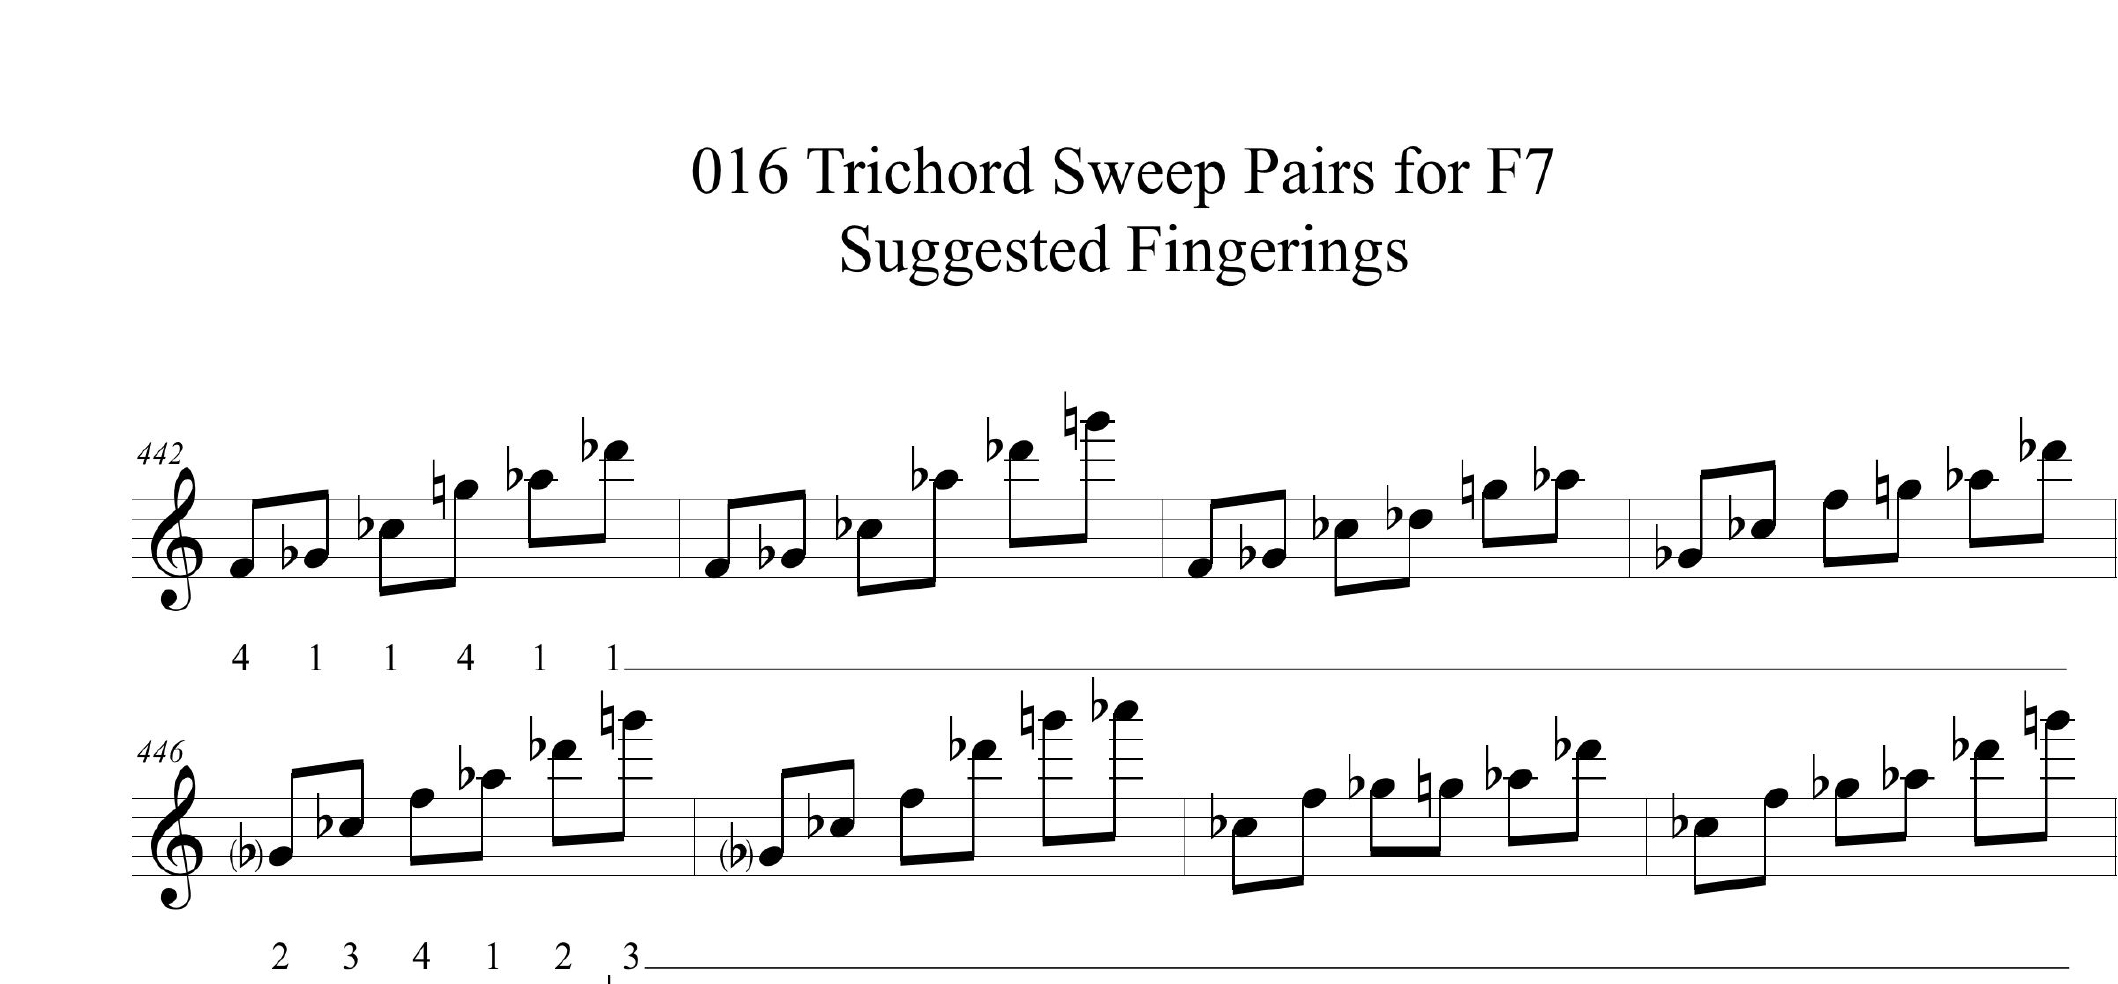 016-trichord-sweep-pairs-suggested-fingerings by Bruce Arnold for Muse Eek Publishing Company